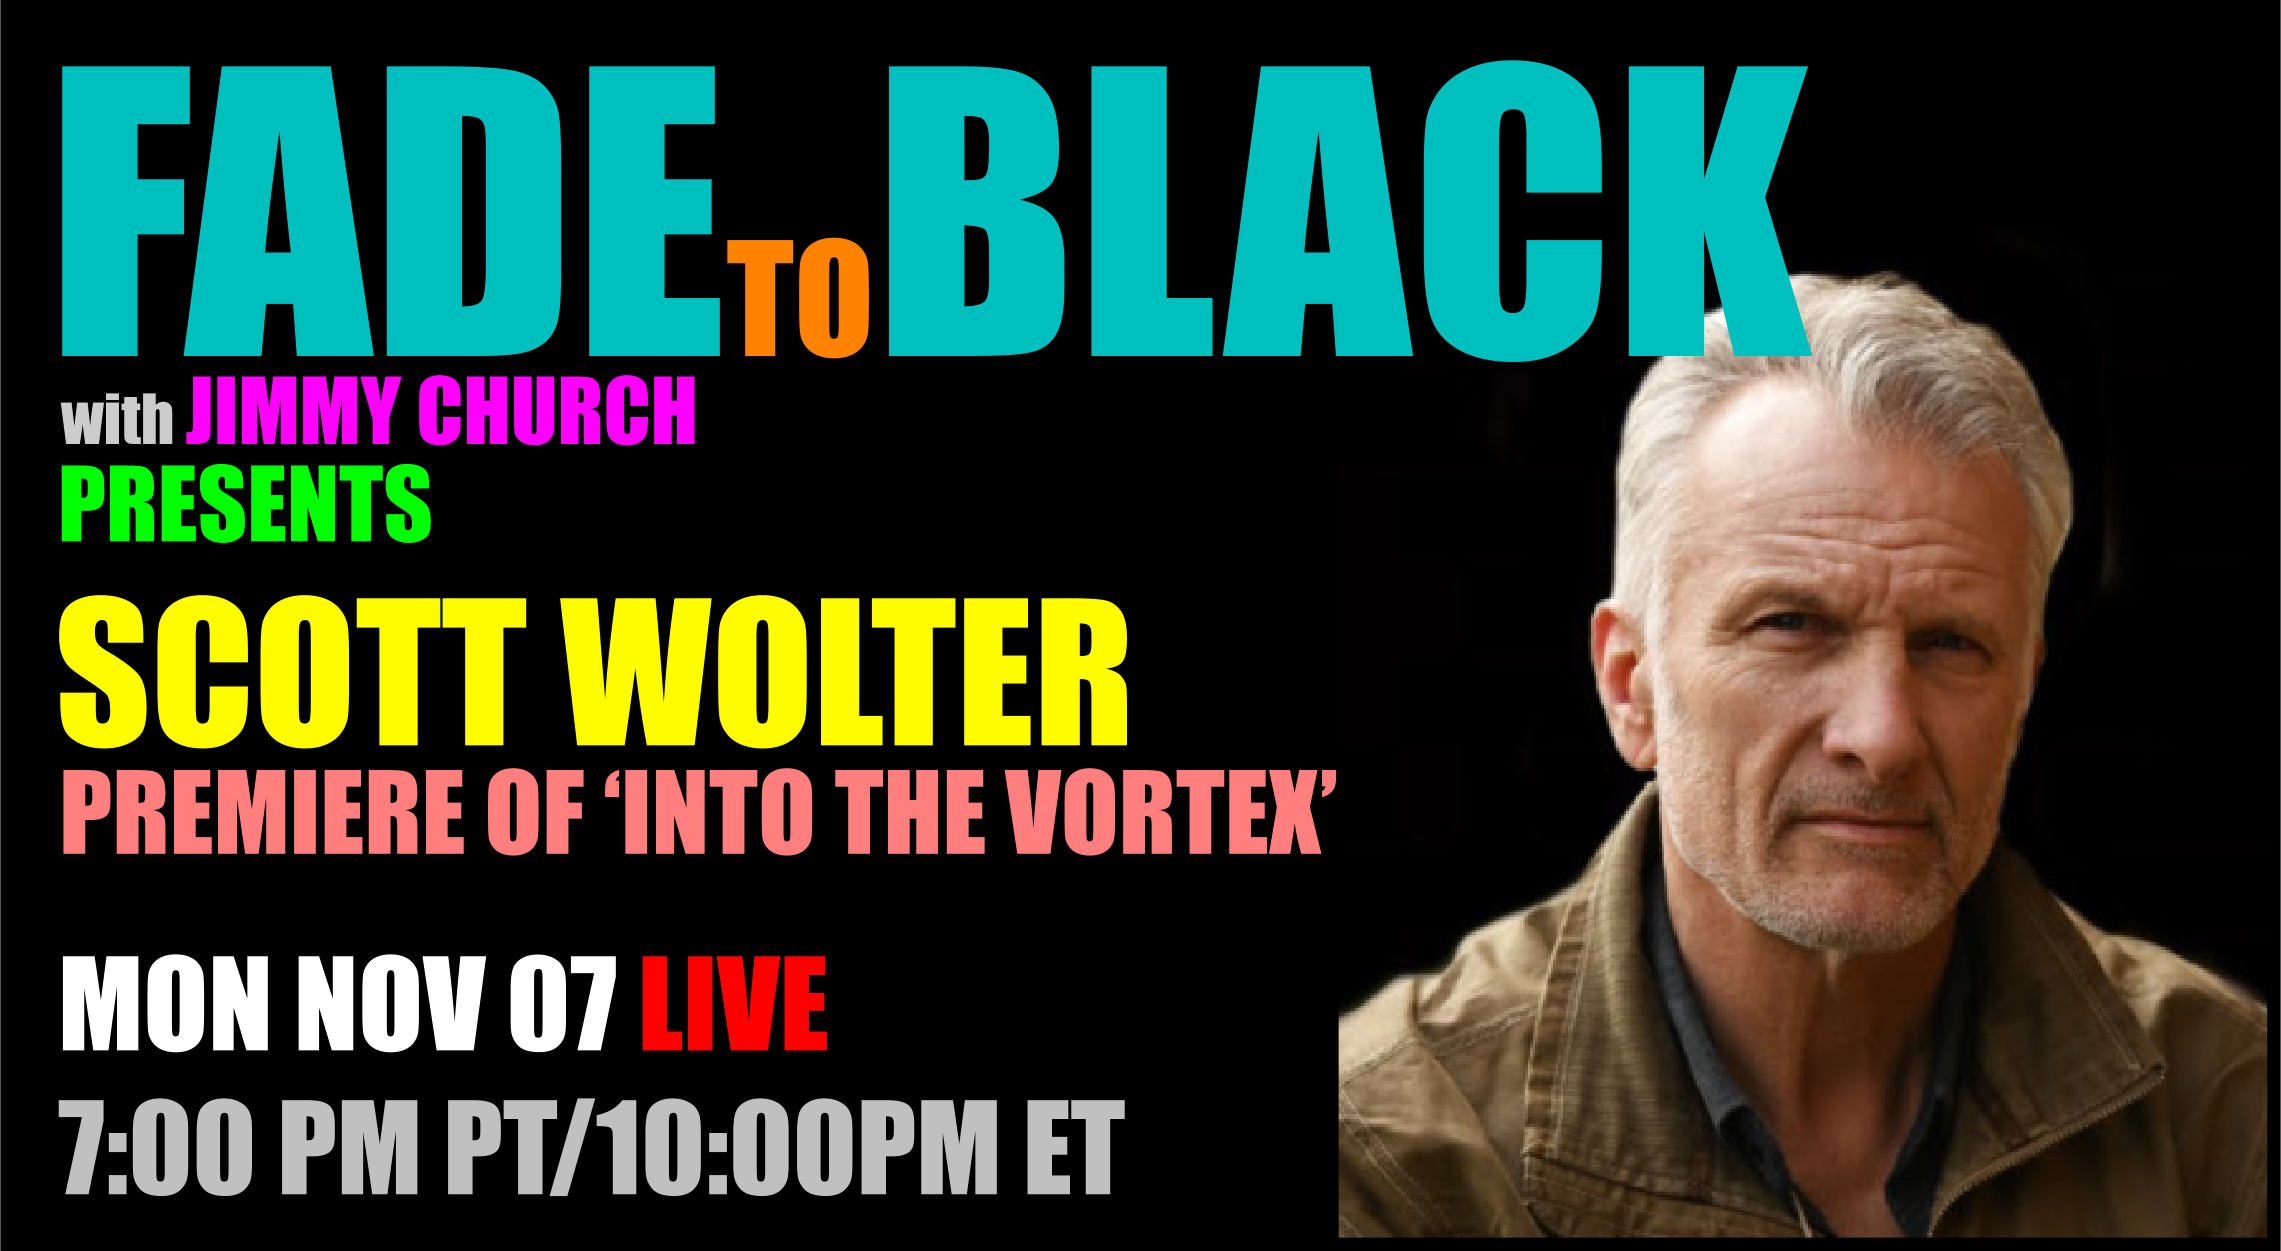 Fade To Black - Scott Wolter - November 7th